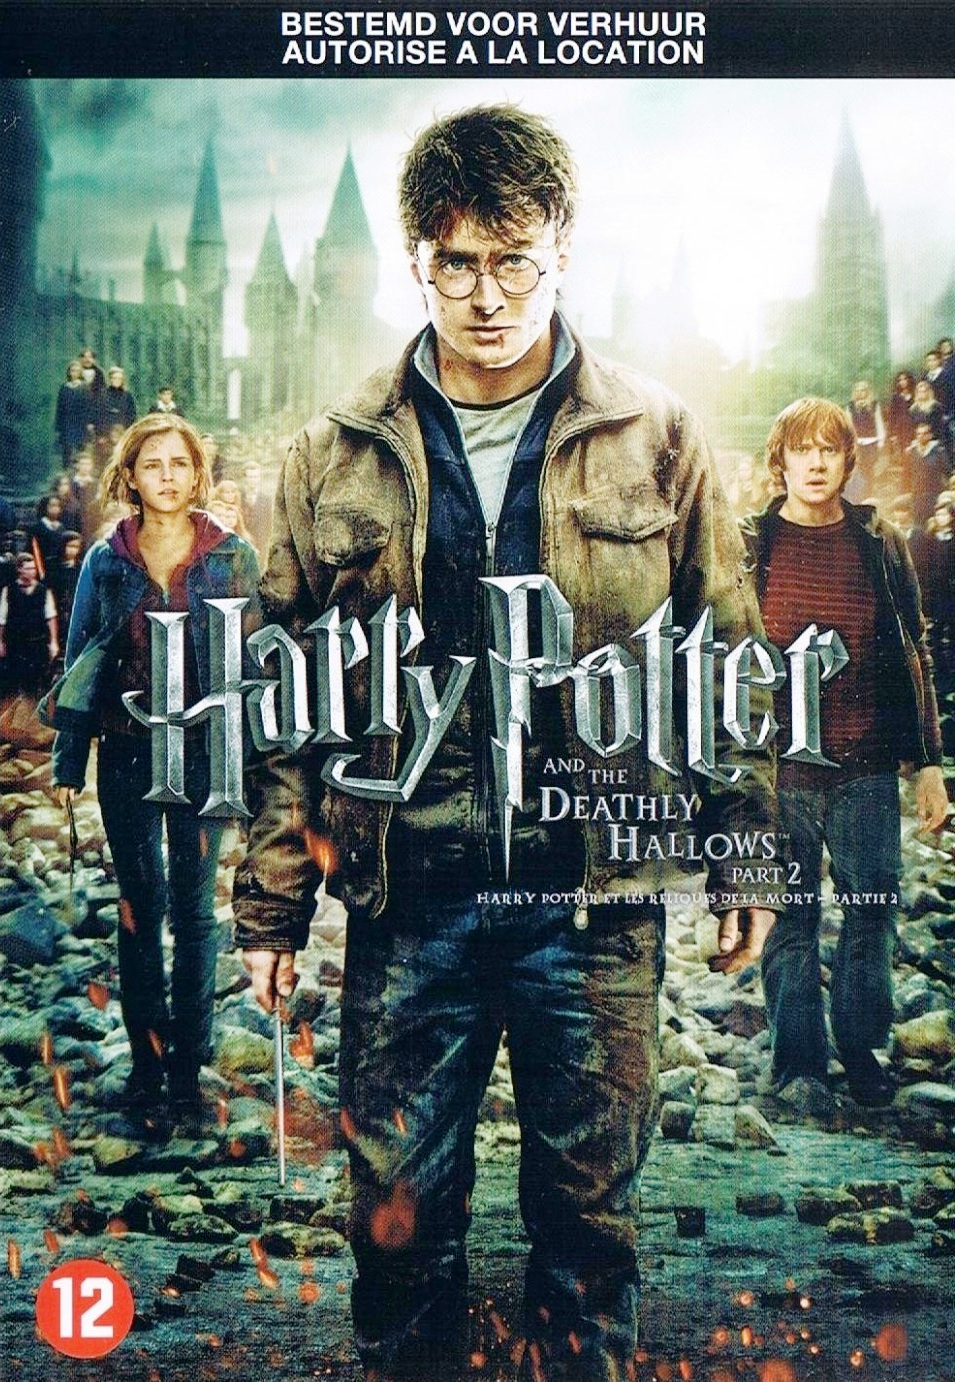 Harry Potter and the Deathly Hallows Part 2 2011 NL subs